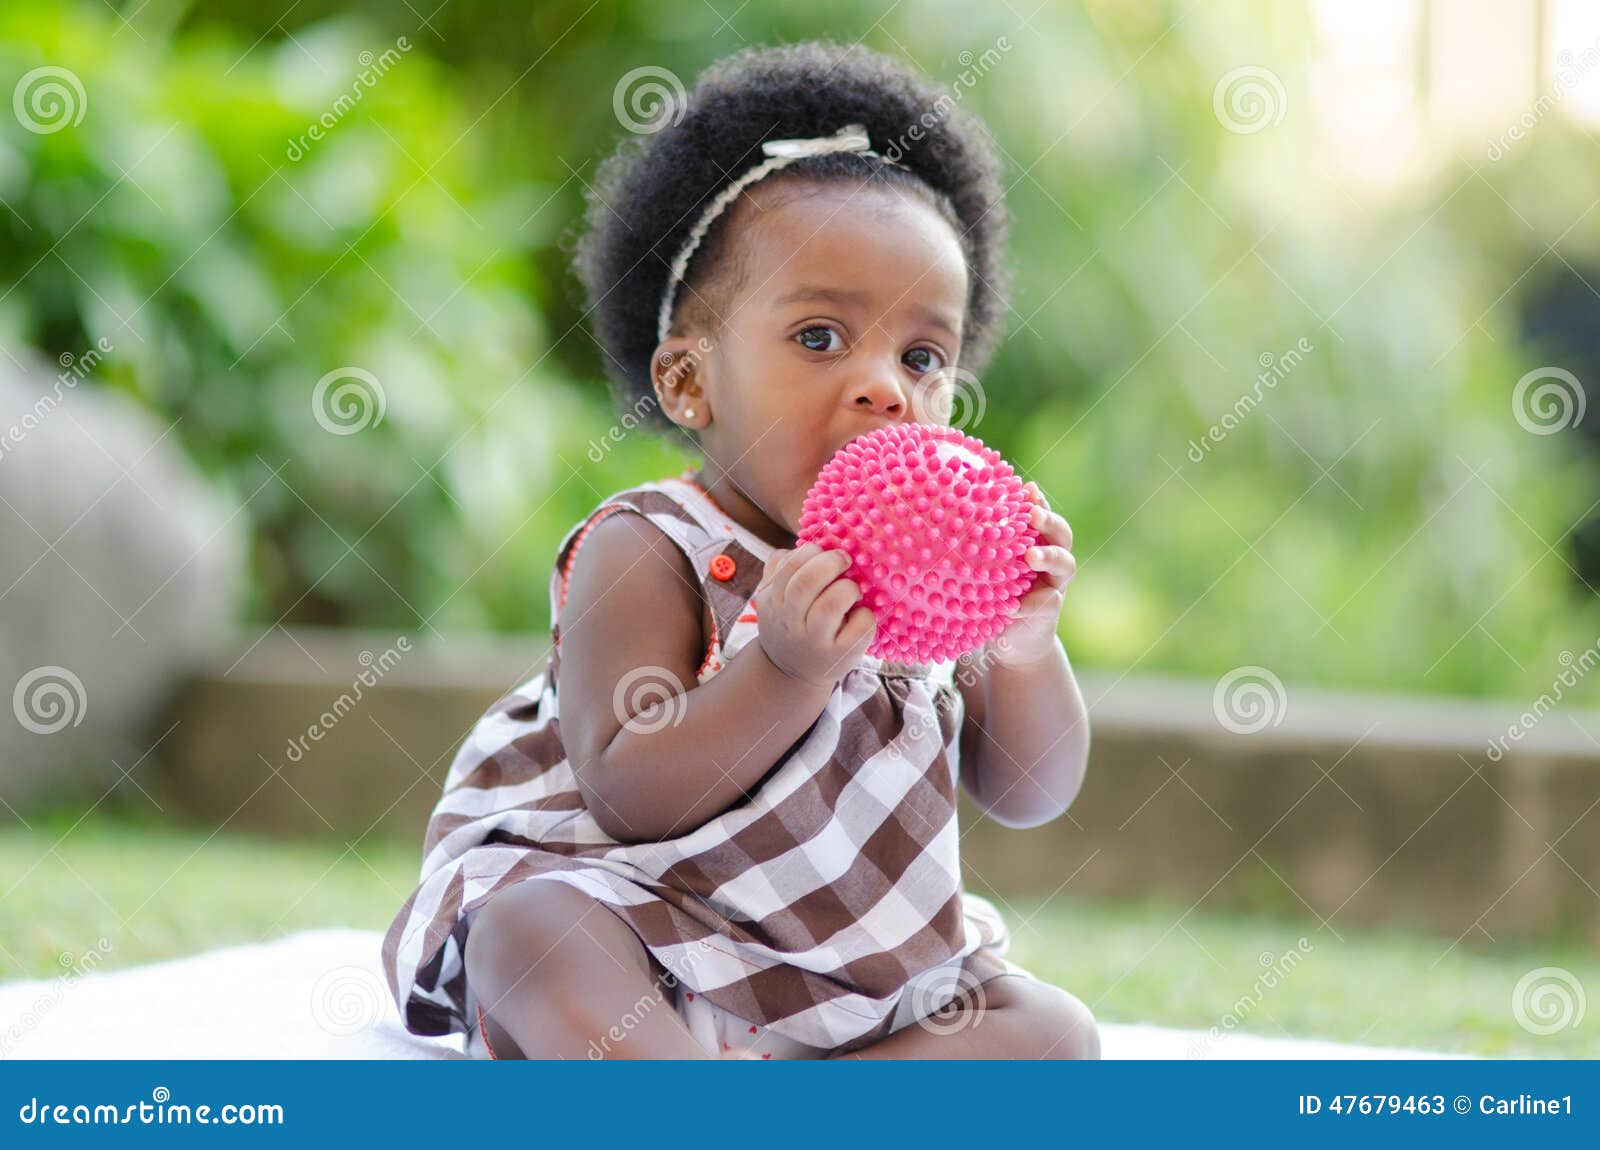 Cute Baby stock image. Image of ethnic, camera, facial - 47679463